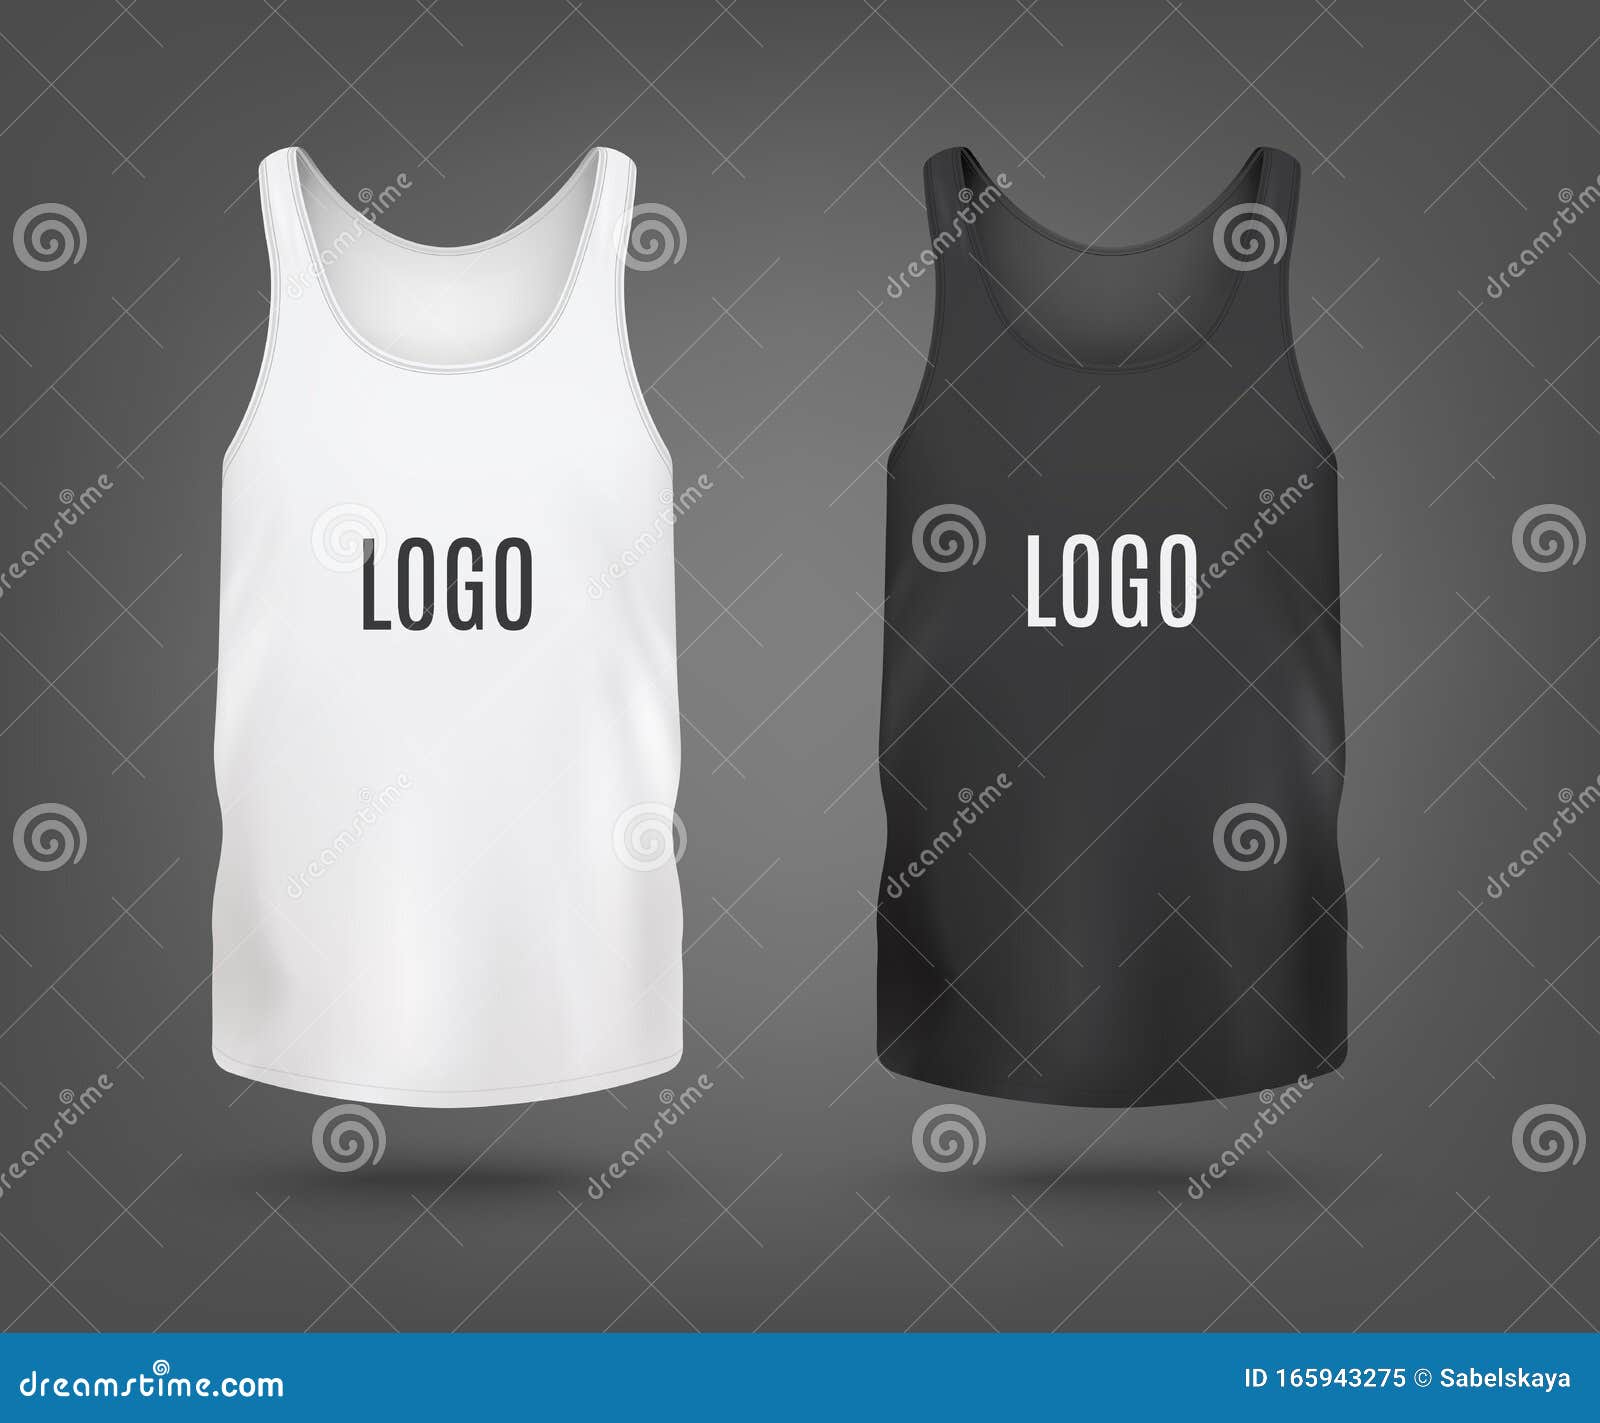 Download Tank Top Or Sleeveless Shirt Template Realistic Vector ...